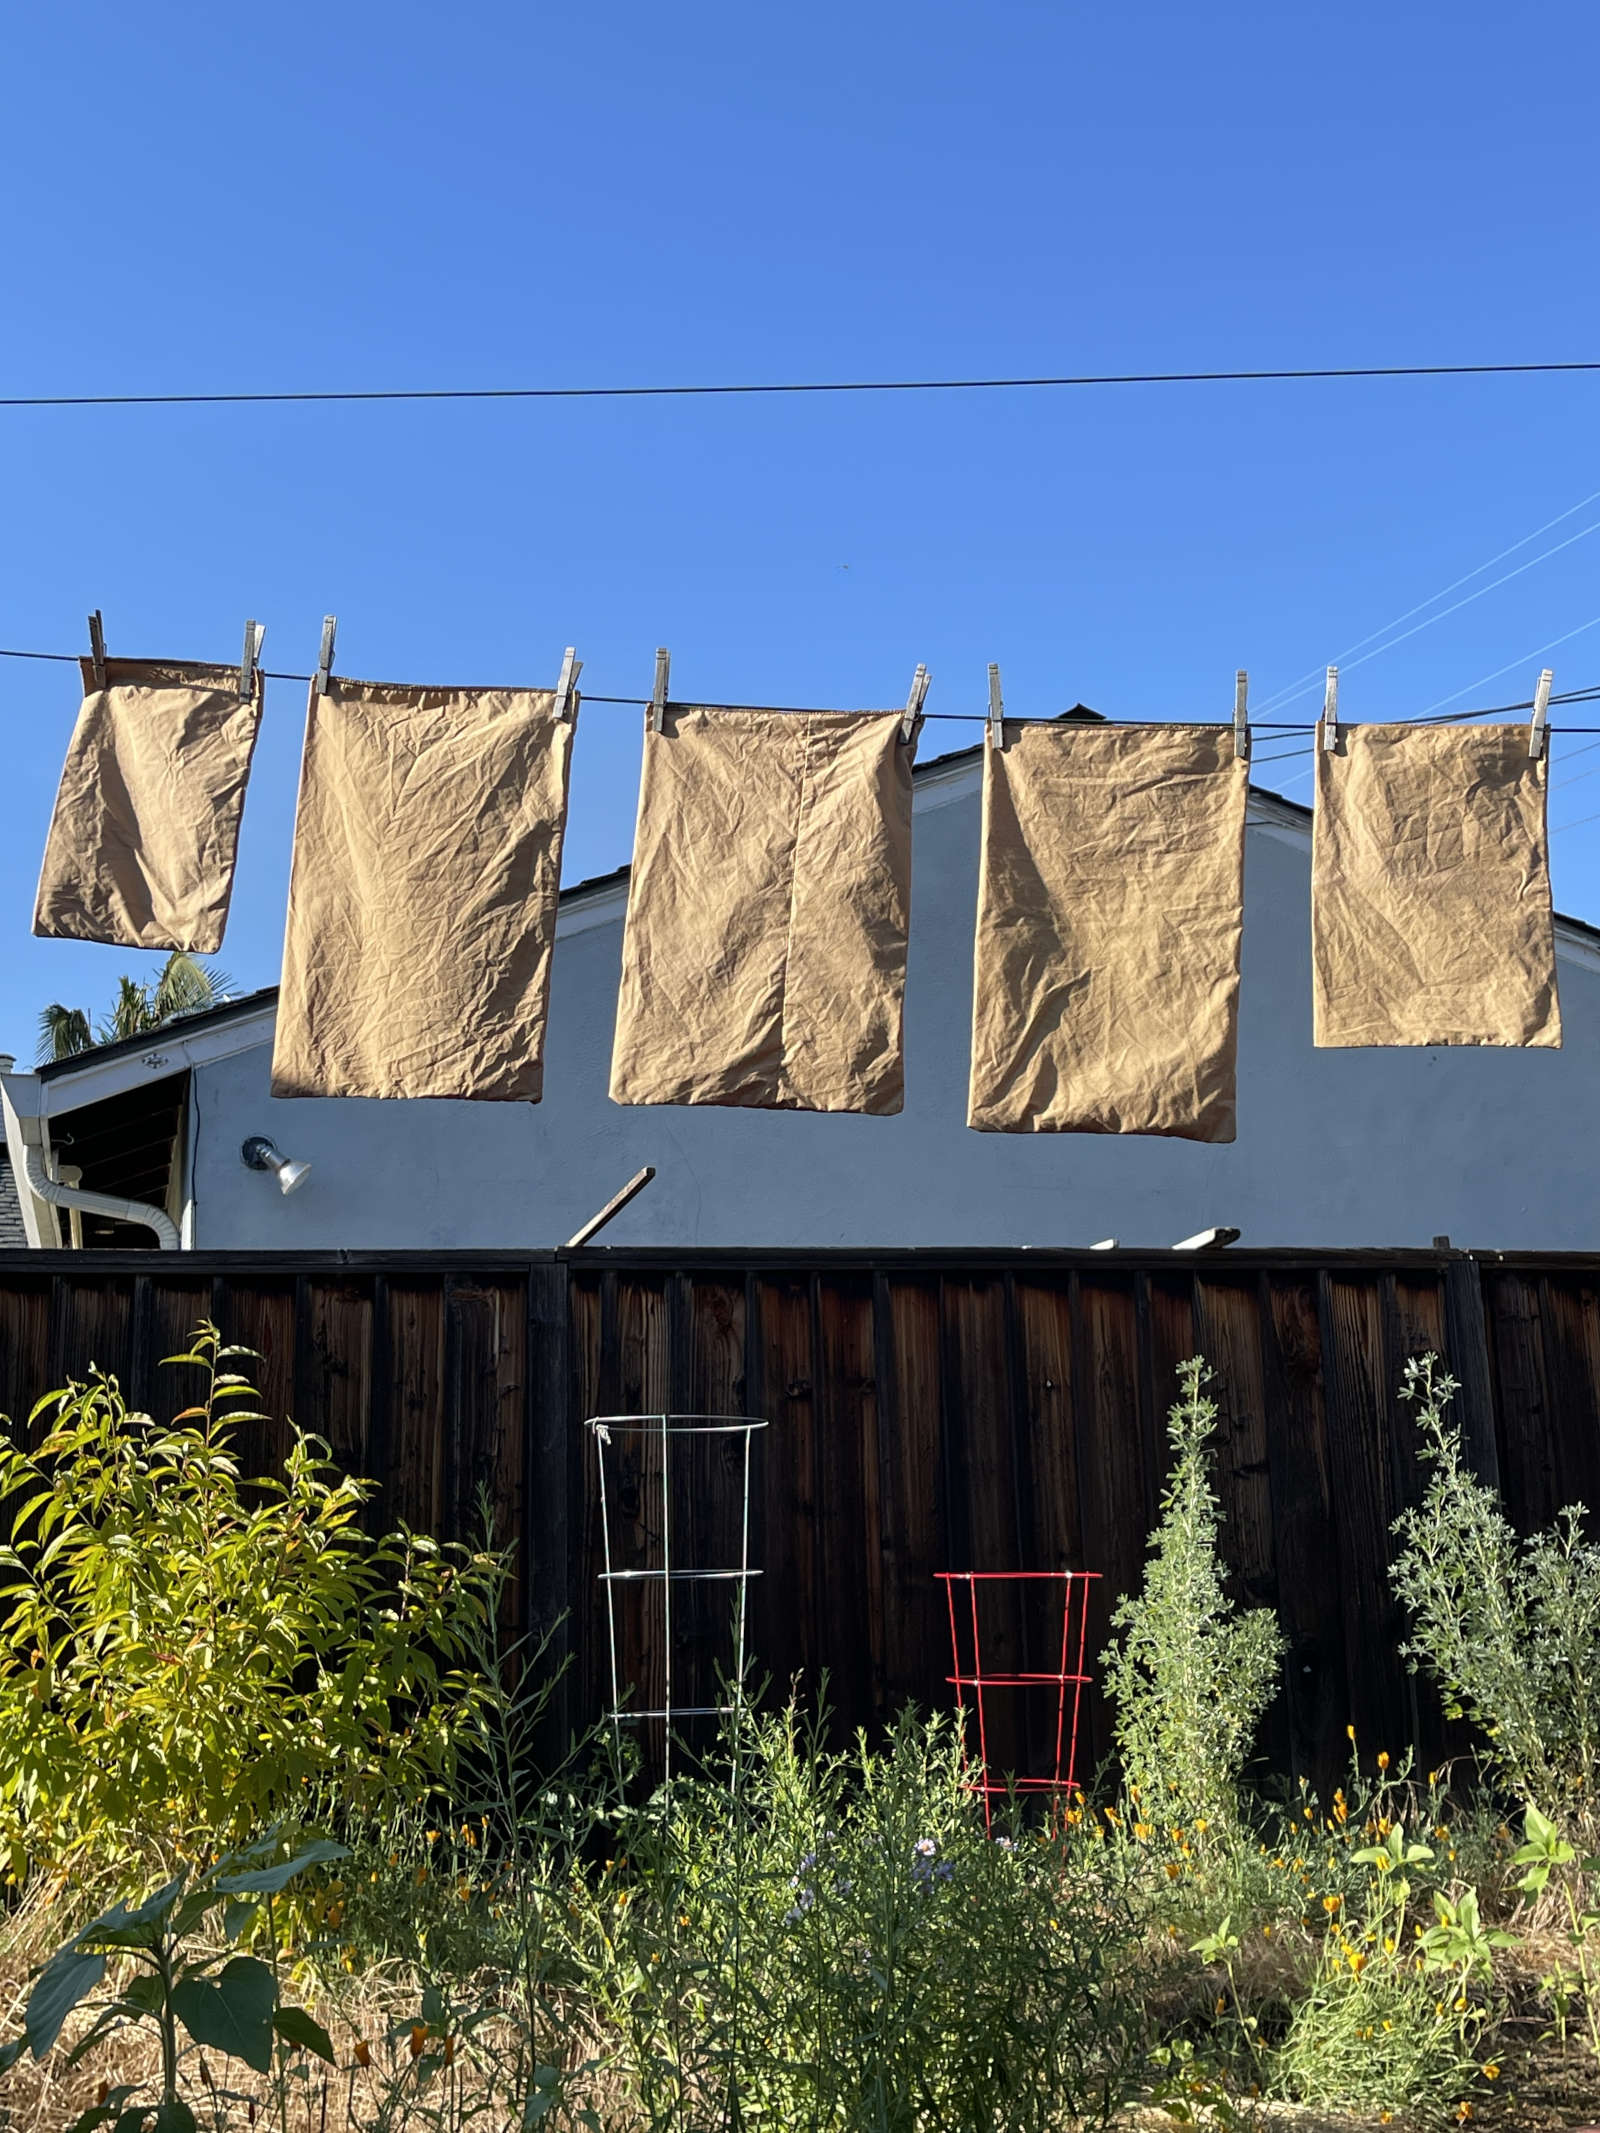 Five produce bags dyed with onion skins dry on a clothesline outside. In the background, plants grow in front of a dark wooded fence.